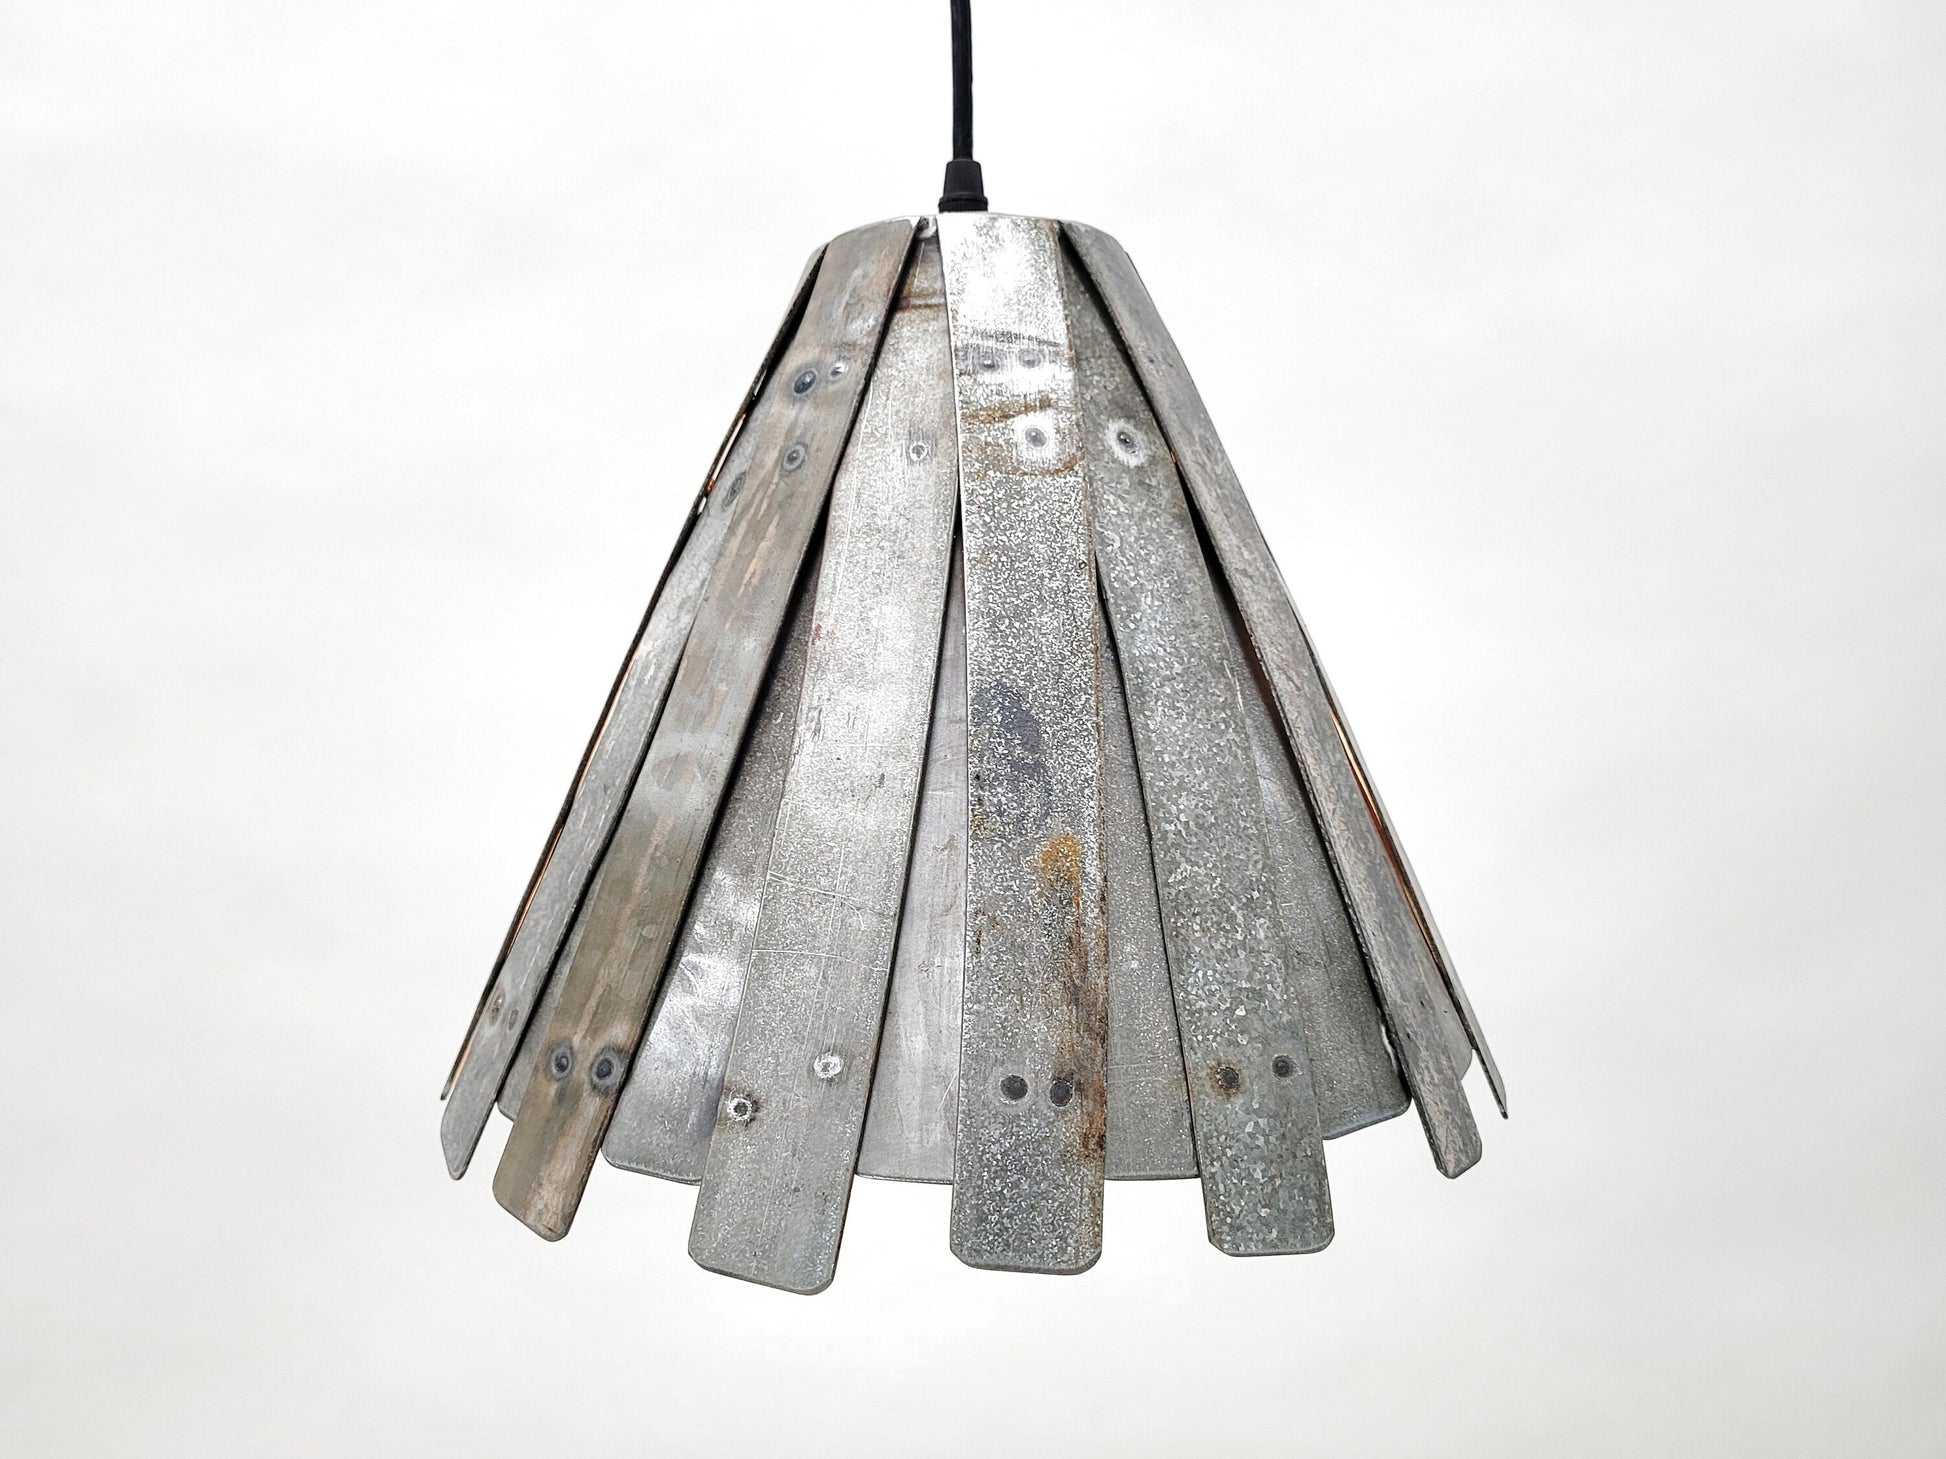 Wine Barrel Ring Pendant Light - Yivli - Made from retired California wine barrel rings. 100% Recycled!